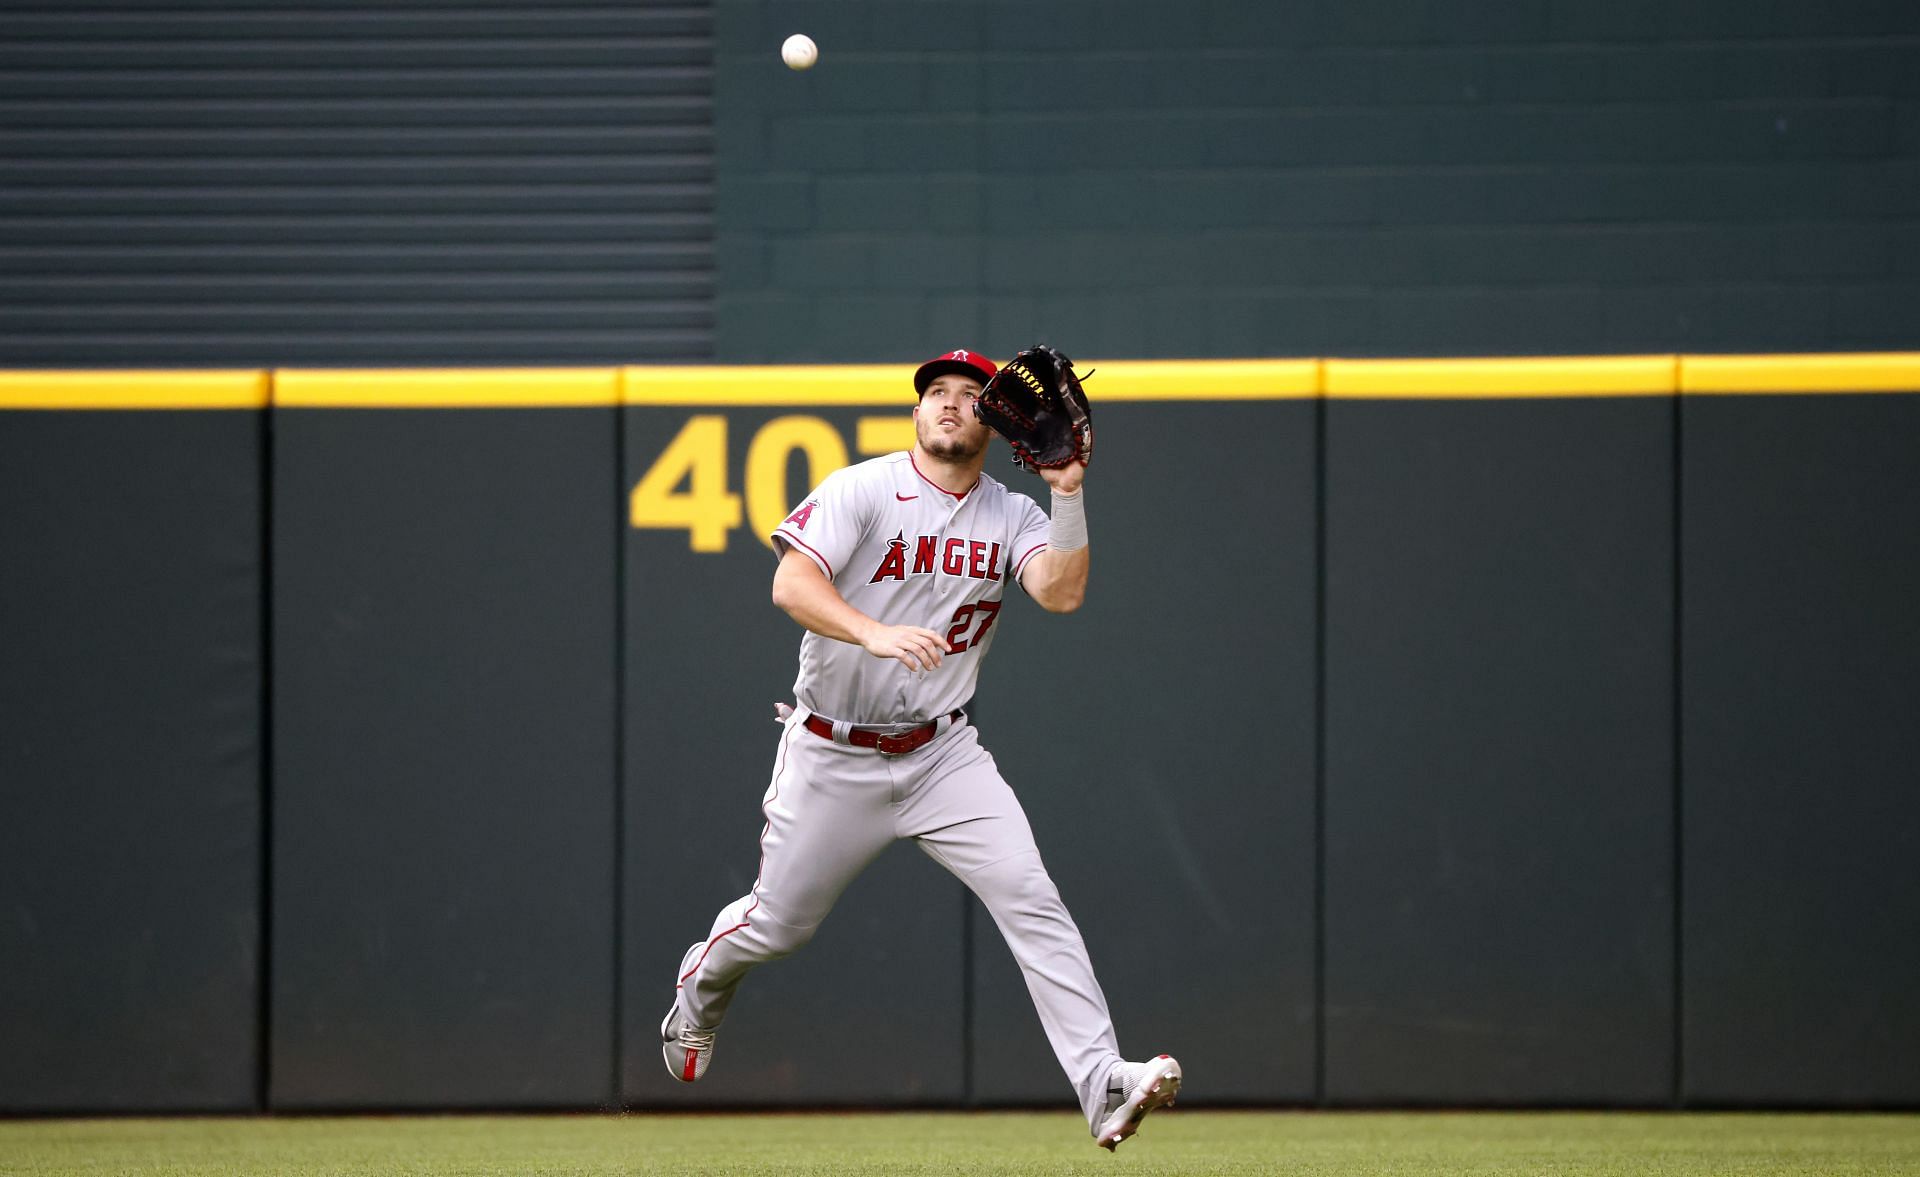 Mike Trout - MLB Center field - News, Stats, Bio and more - The Athletic